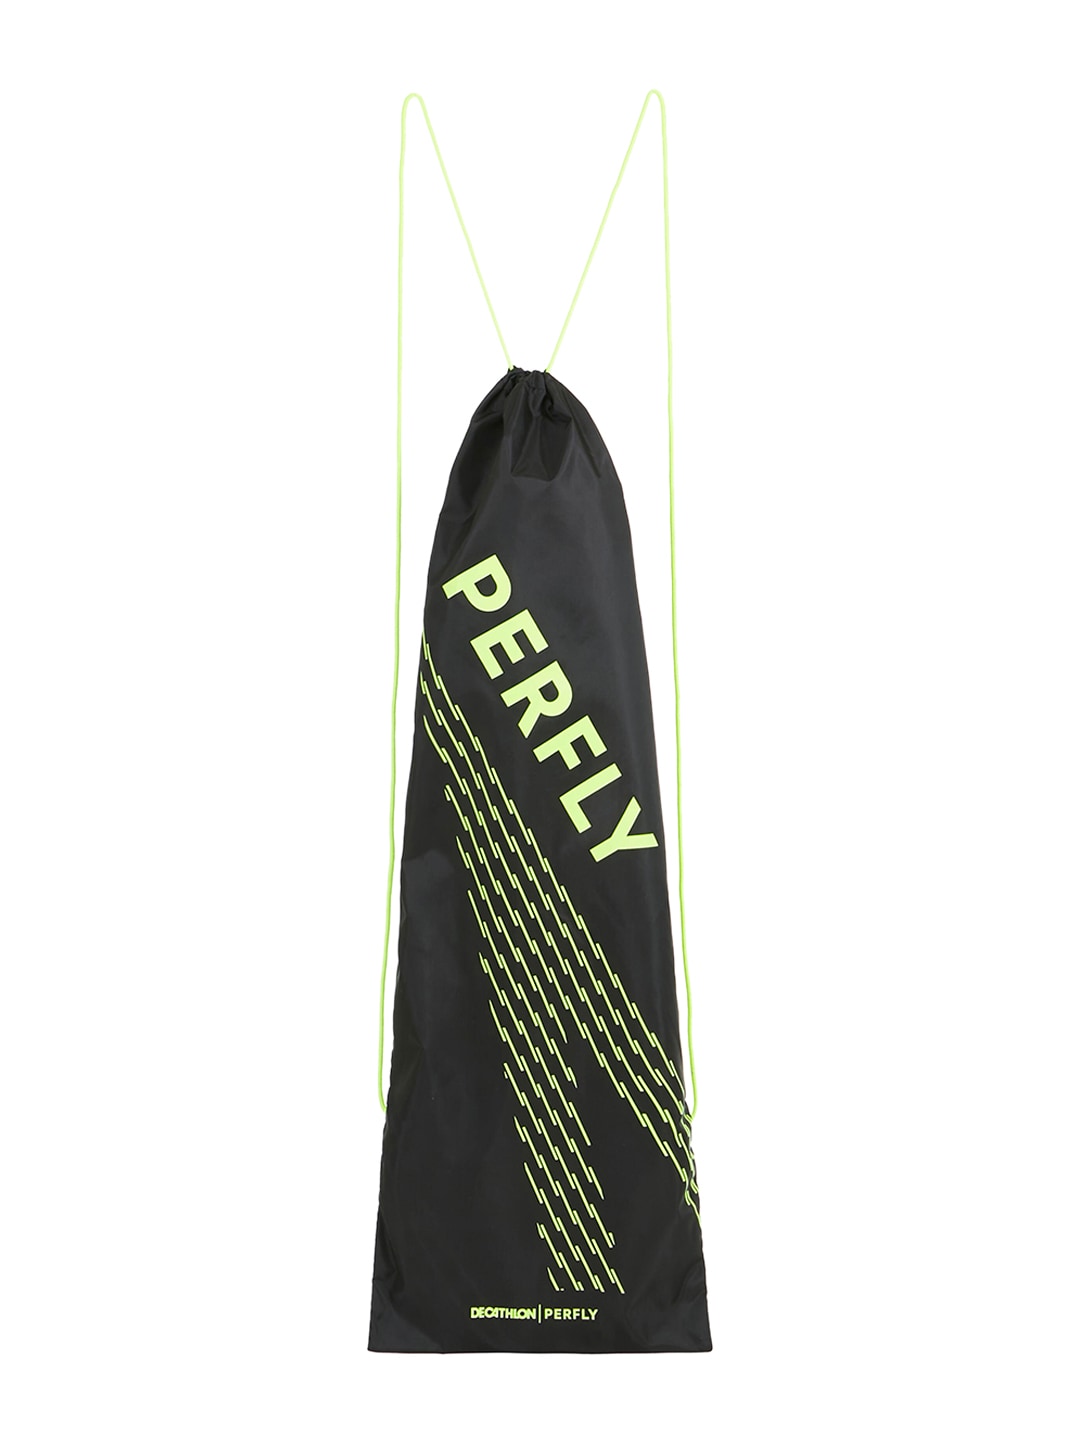 PERFLY By Decathlon Unisex Black & Green Badminton Cover Price in India